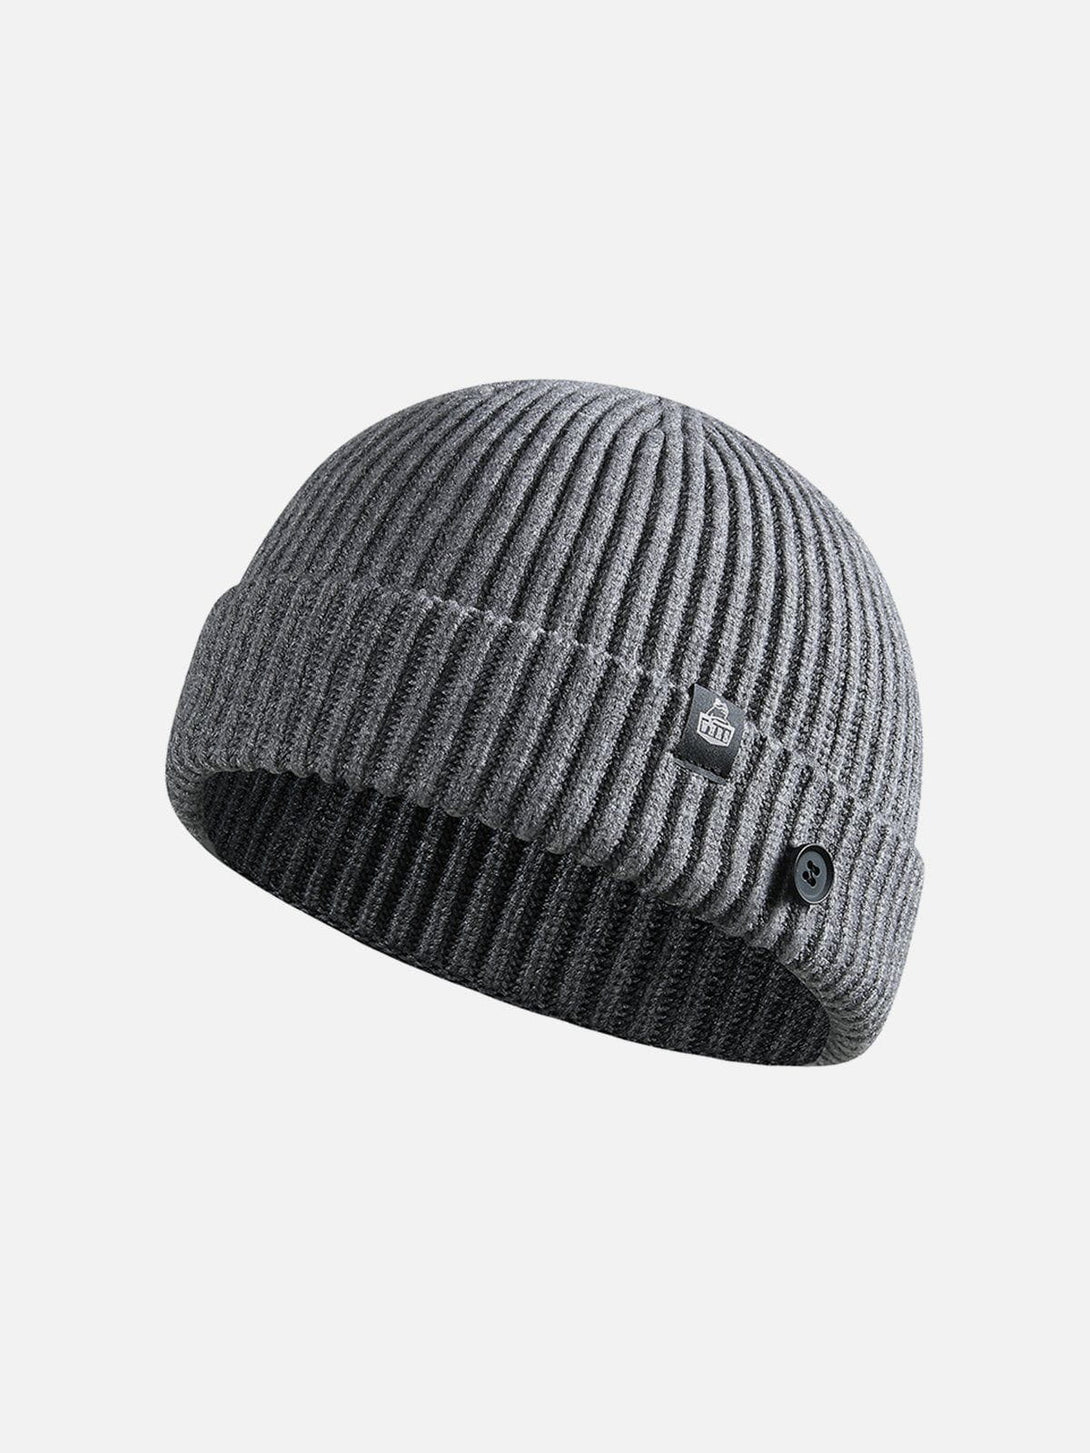 Levefly - Buttons Knit Dome Hat - Streetwear Fashion - levefly.com